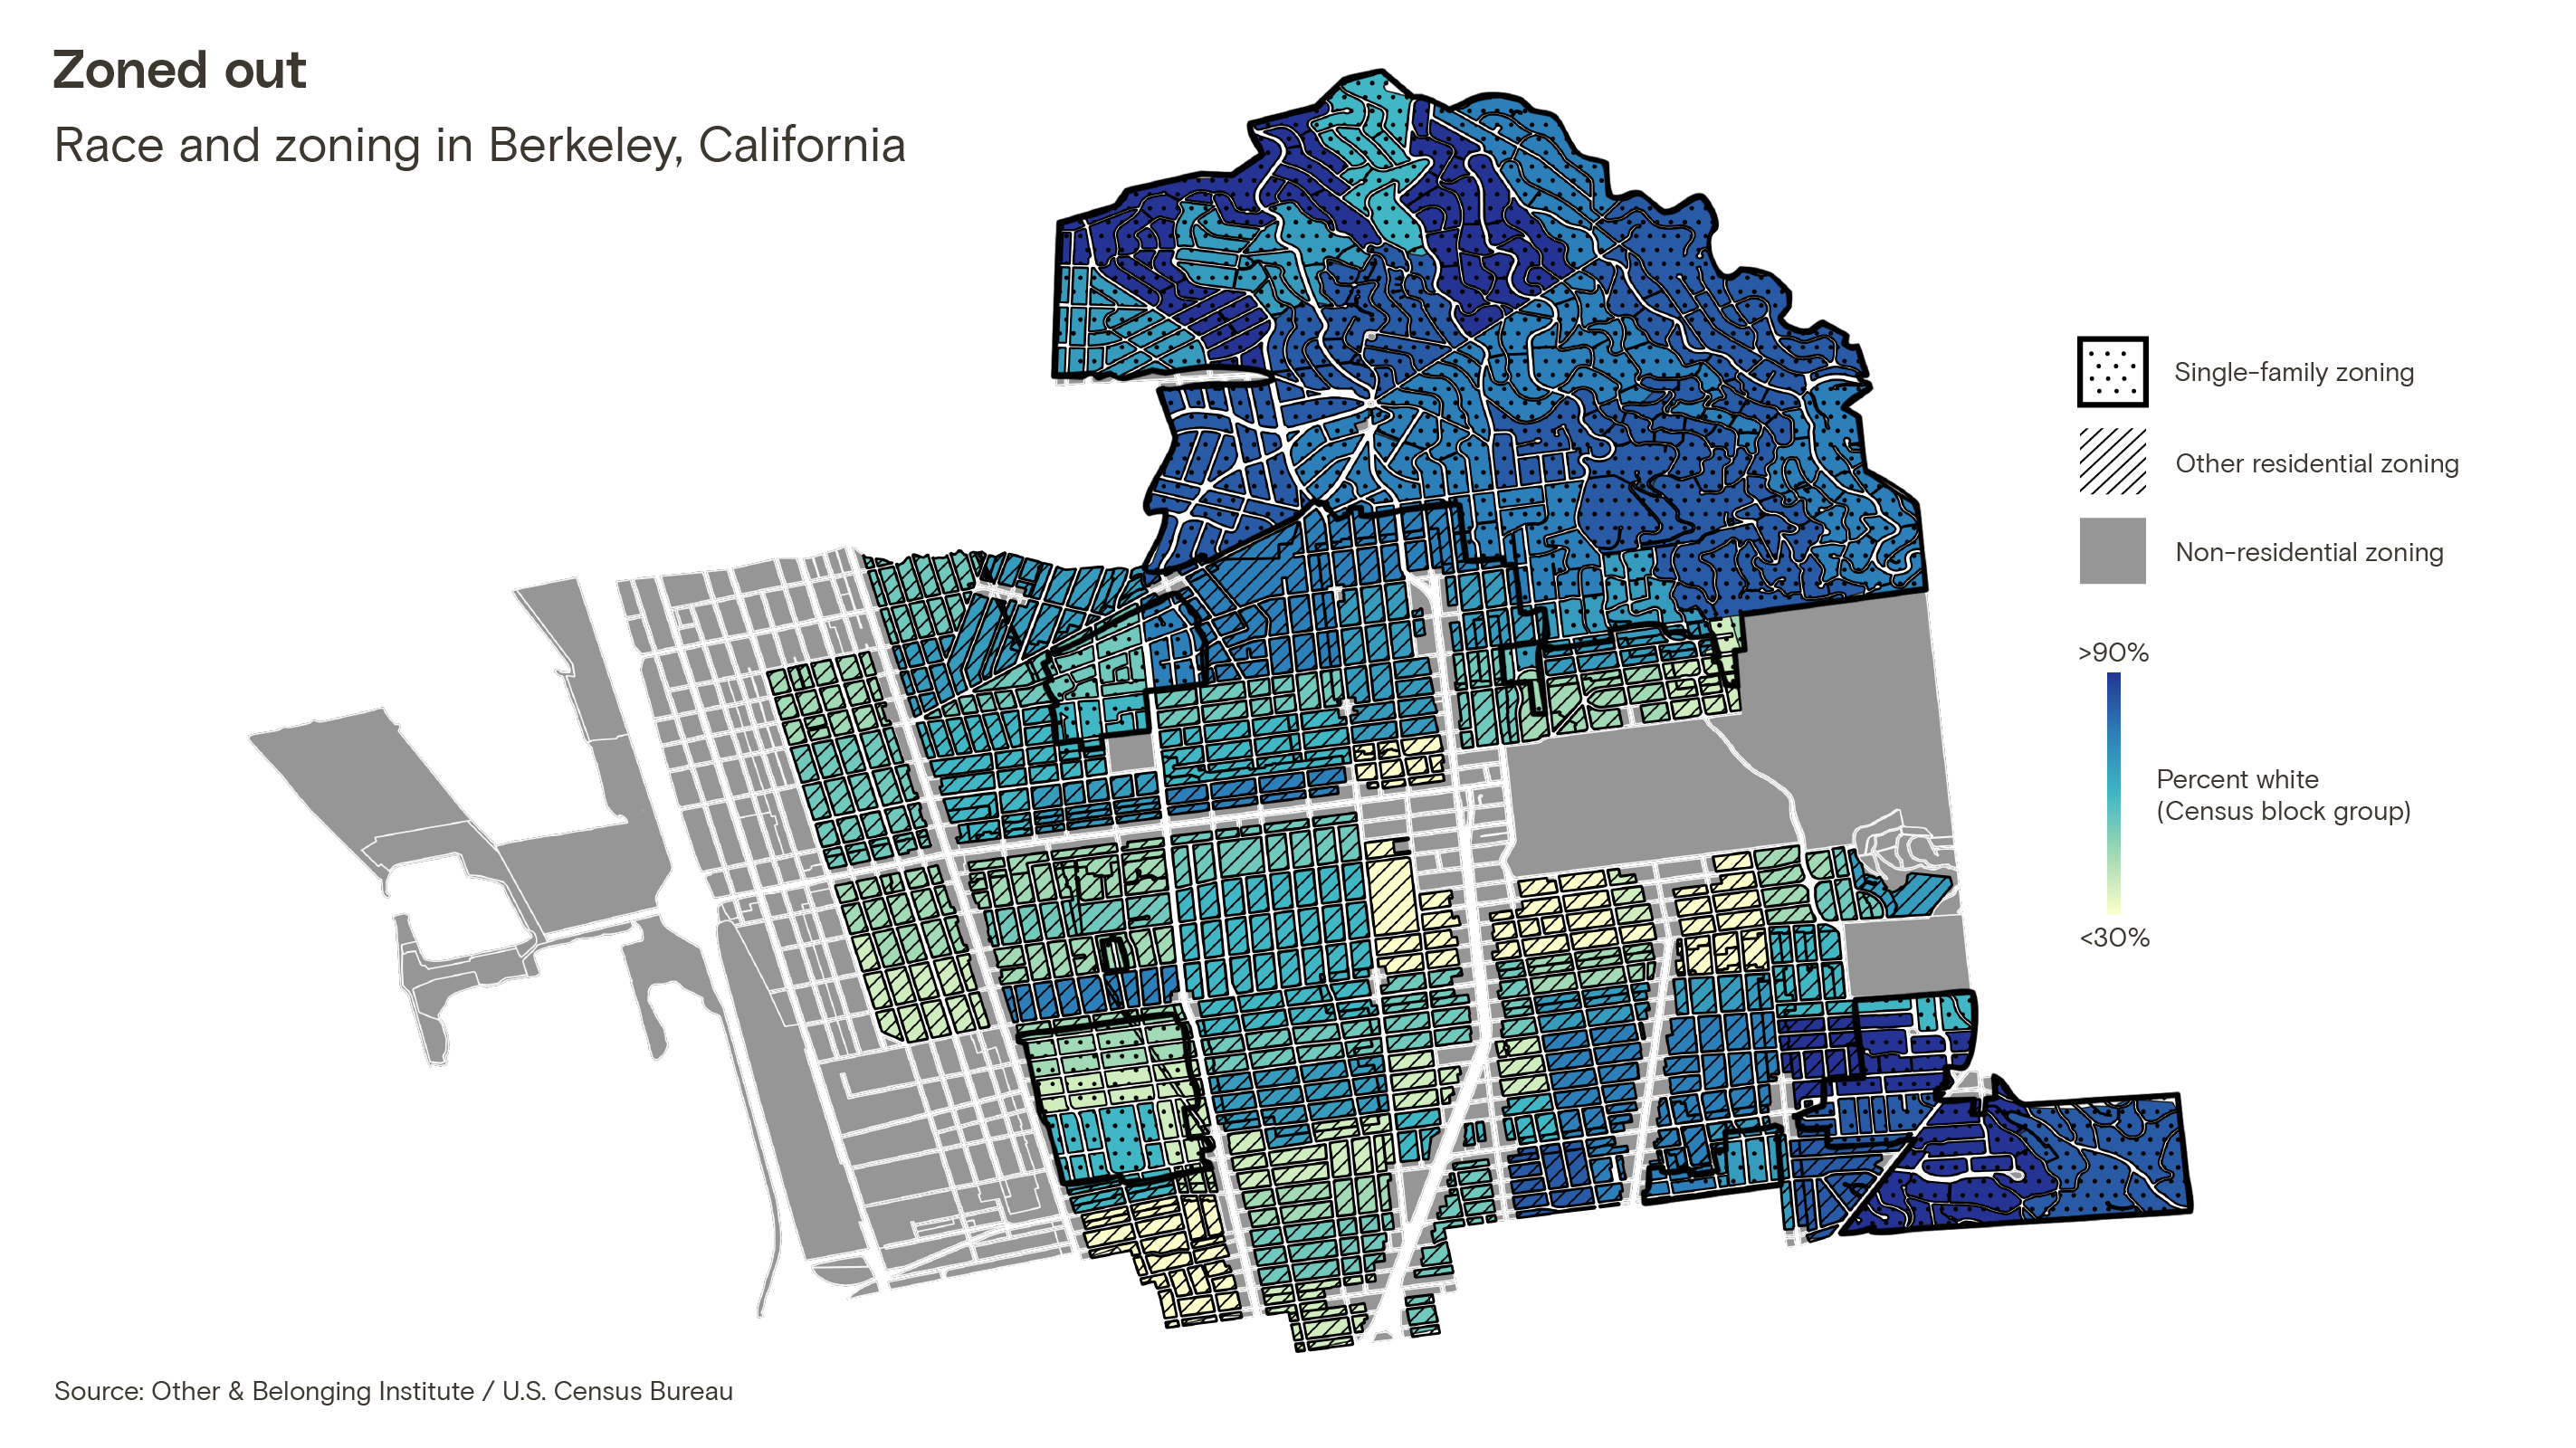 A map of Berkeley showing residential zoning categories and race by Census block group (using a blue-green color scale, in which a higher percentage of white people is represented by a darker shade of blue). Single-family zoned areas in the northeast region of the map have a higher percentage of white people than other residential areas in the center of the city.